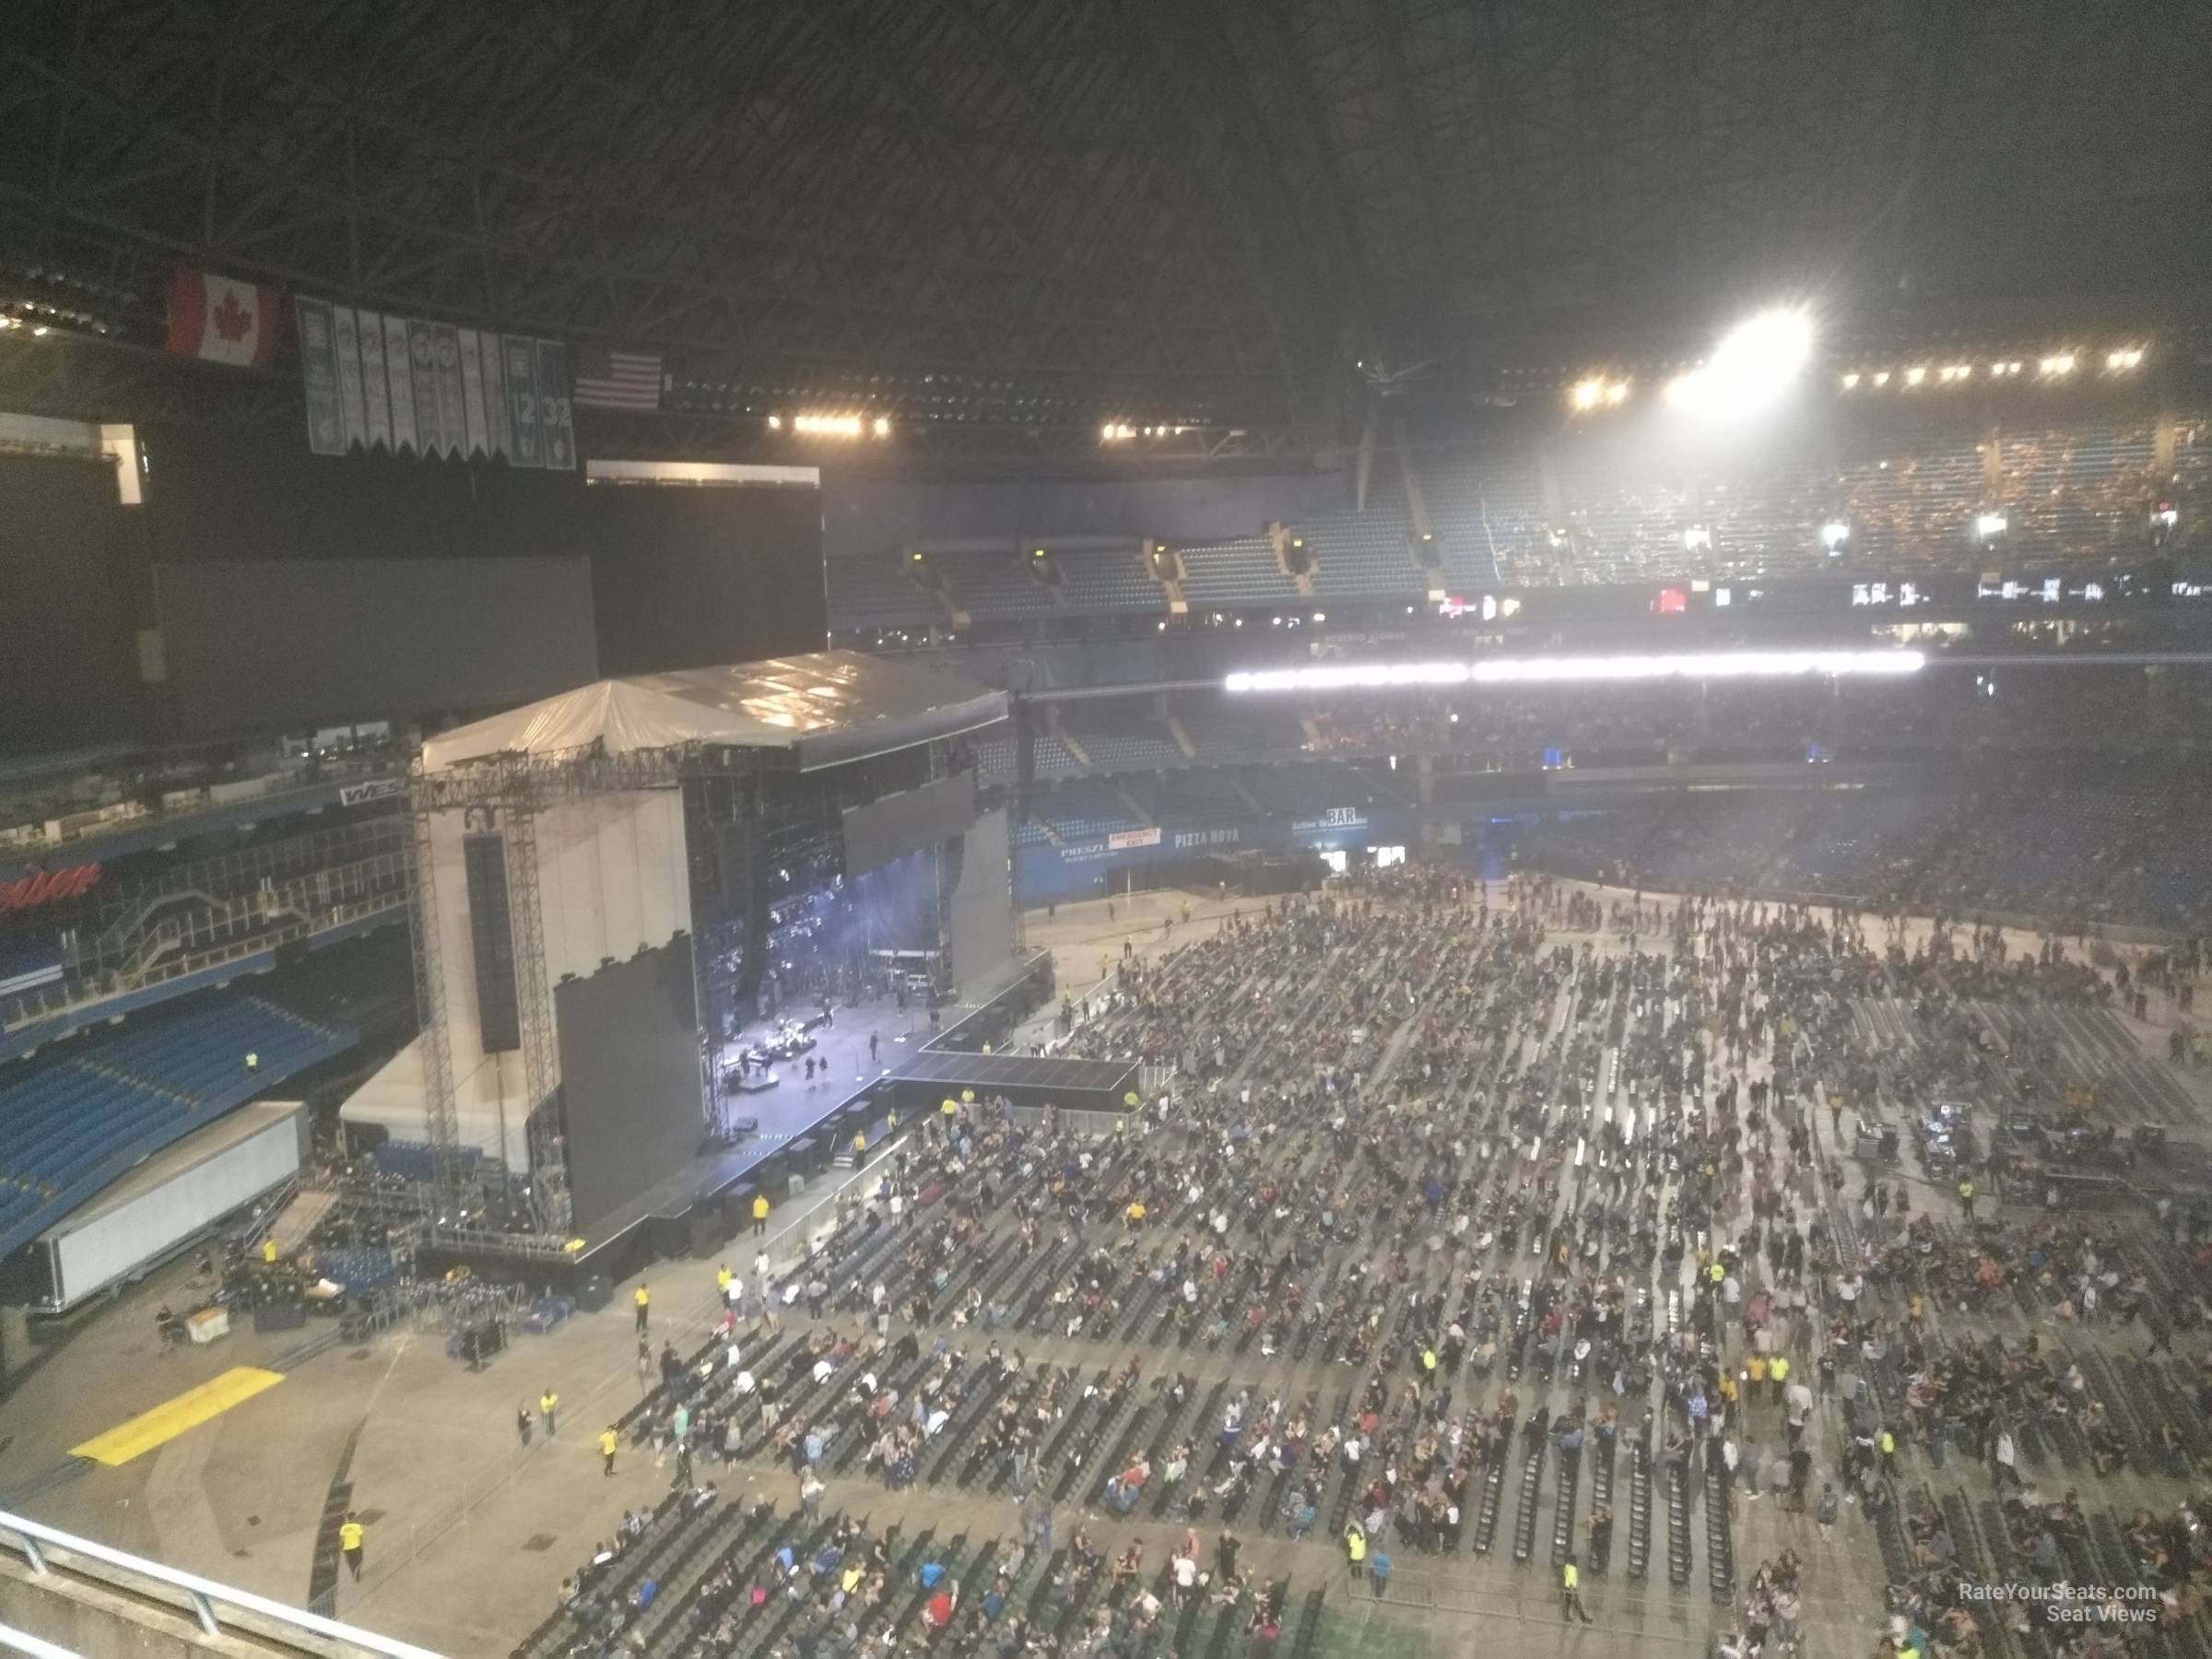 section 537, row 5 seat view  for concert - rogers centre